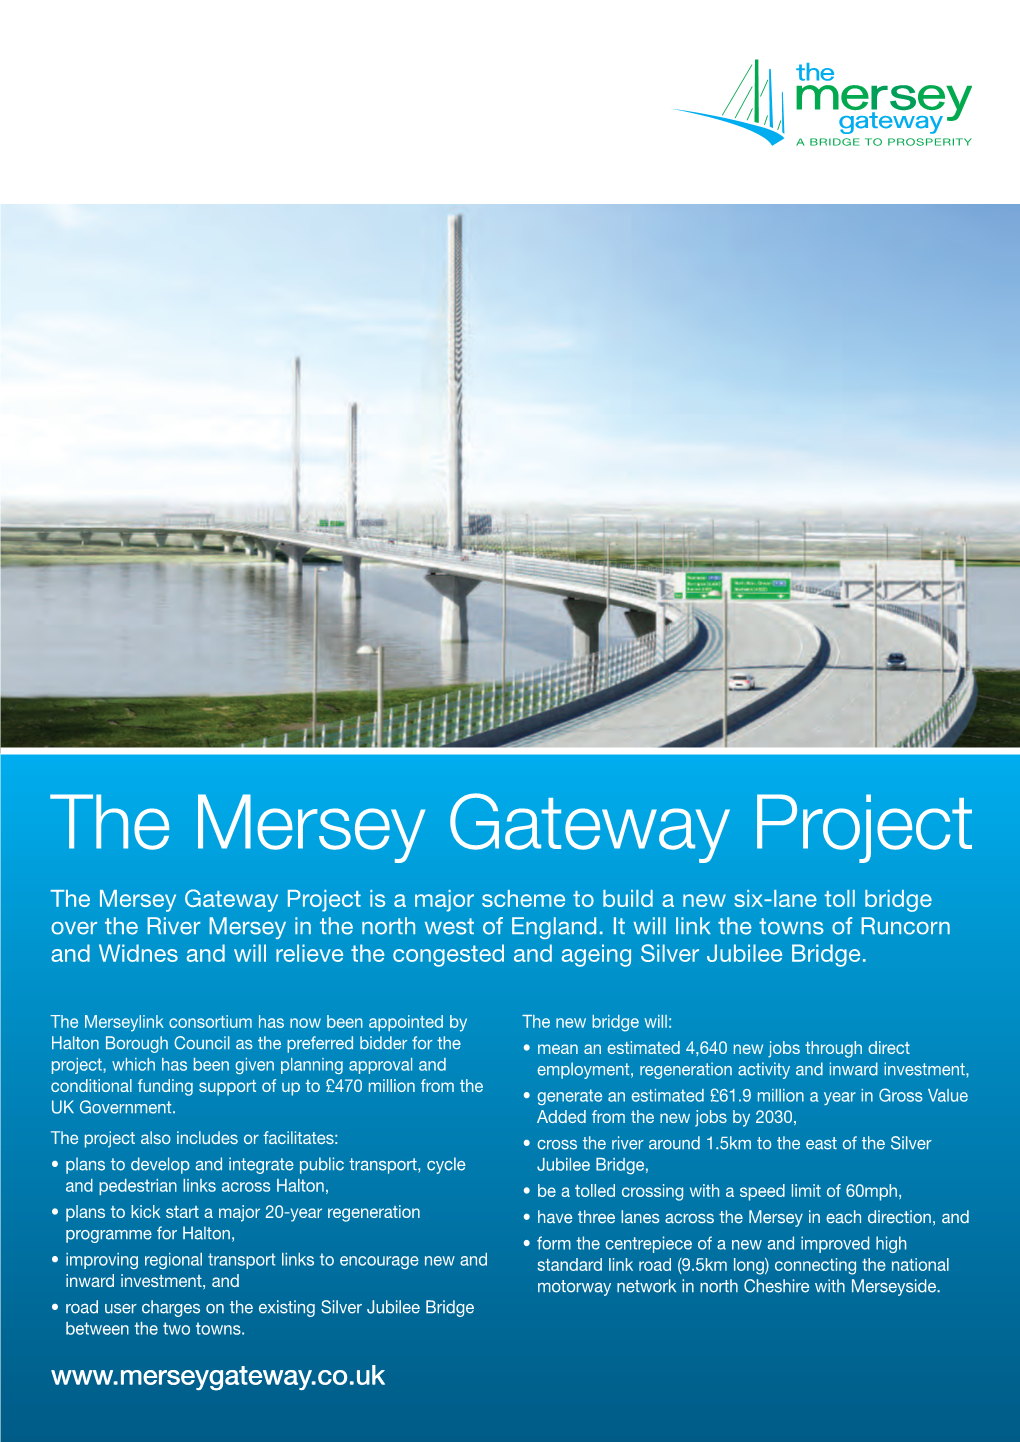 The Mersey Gateway Project